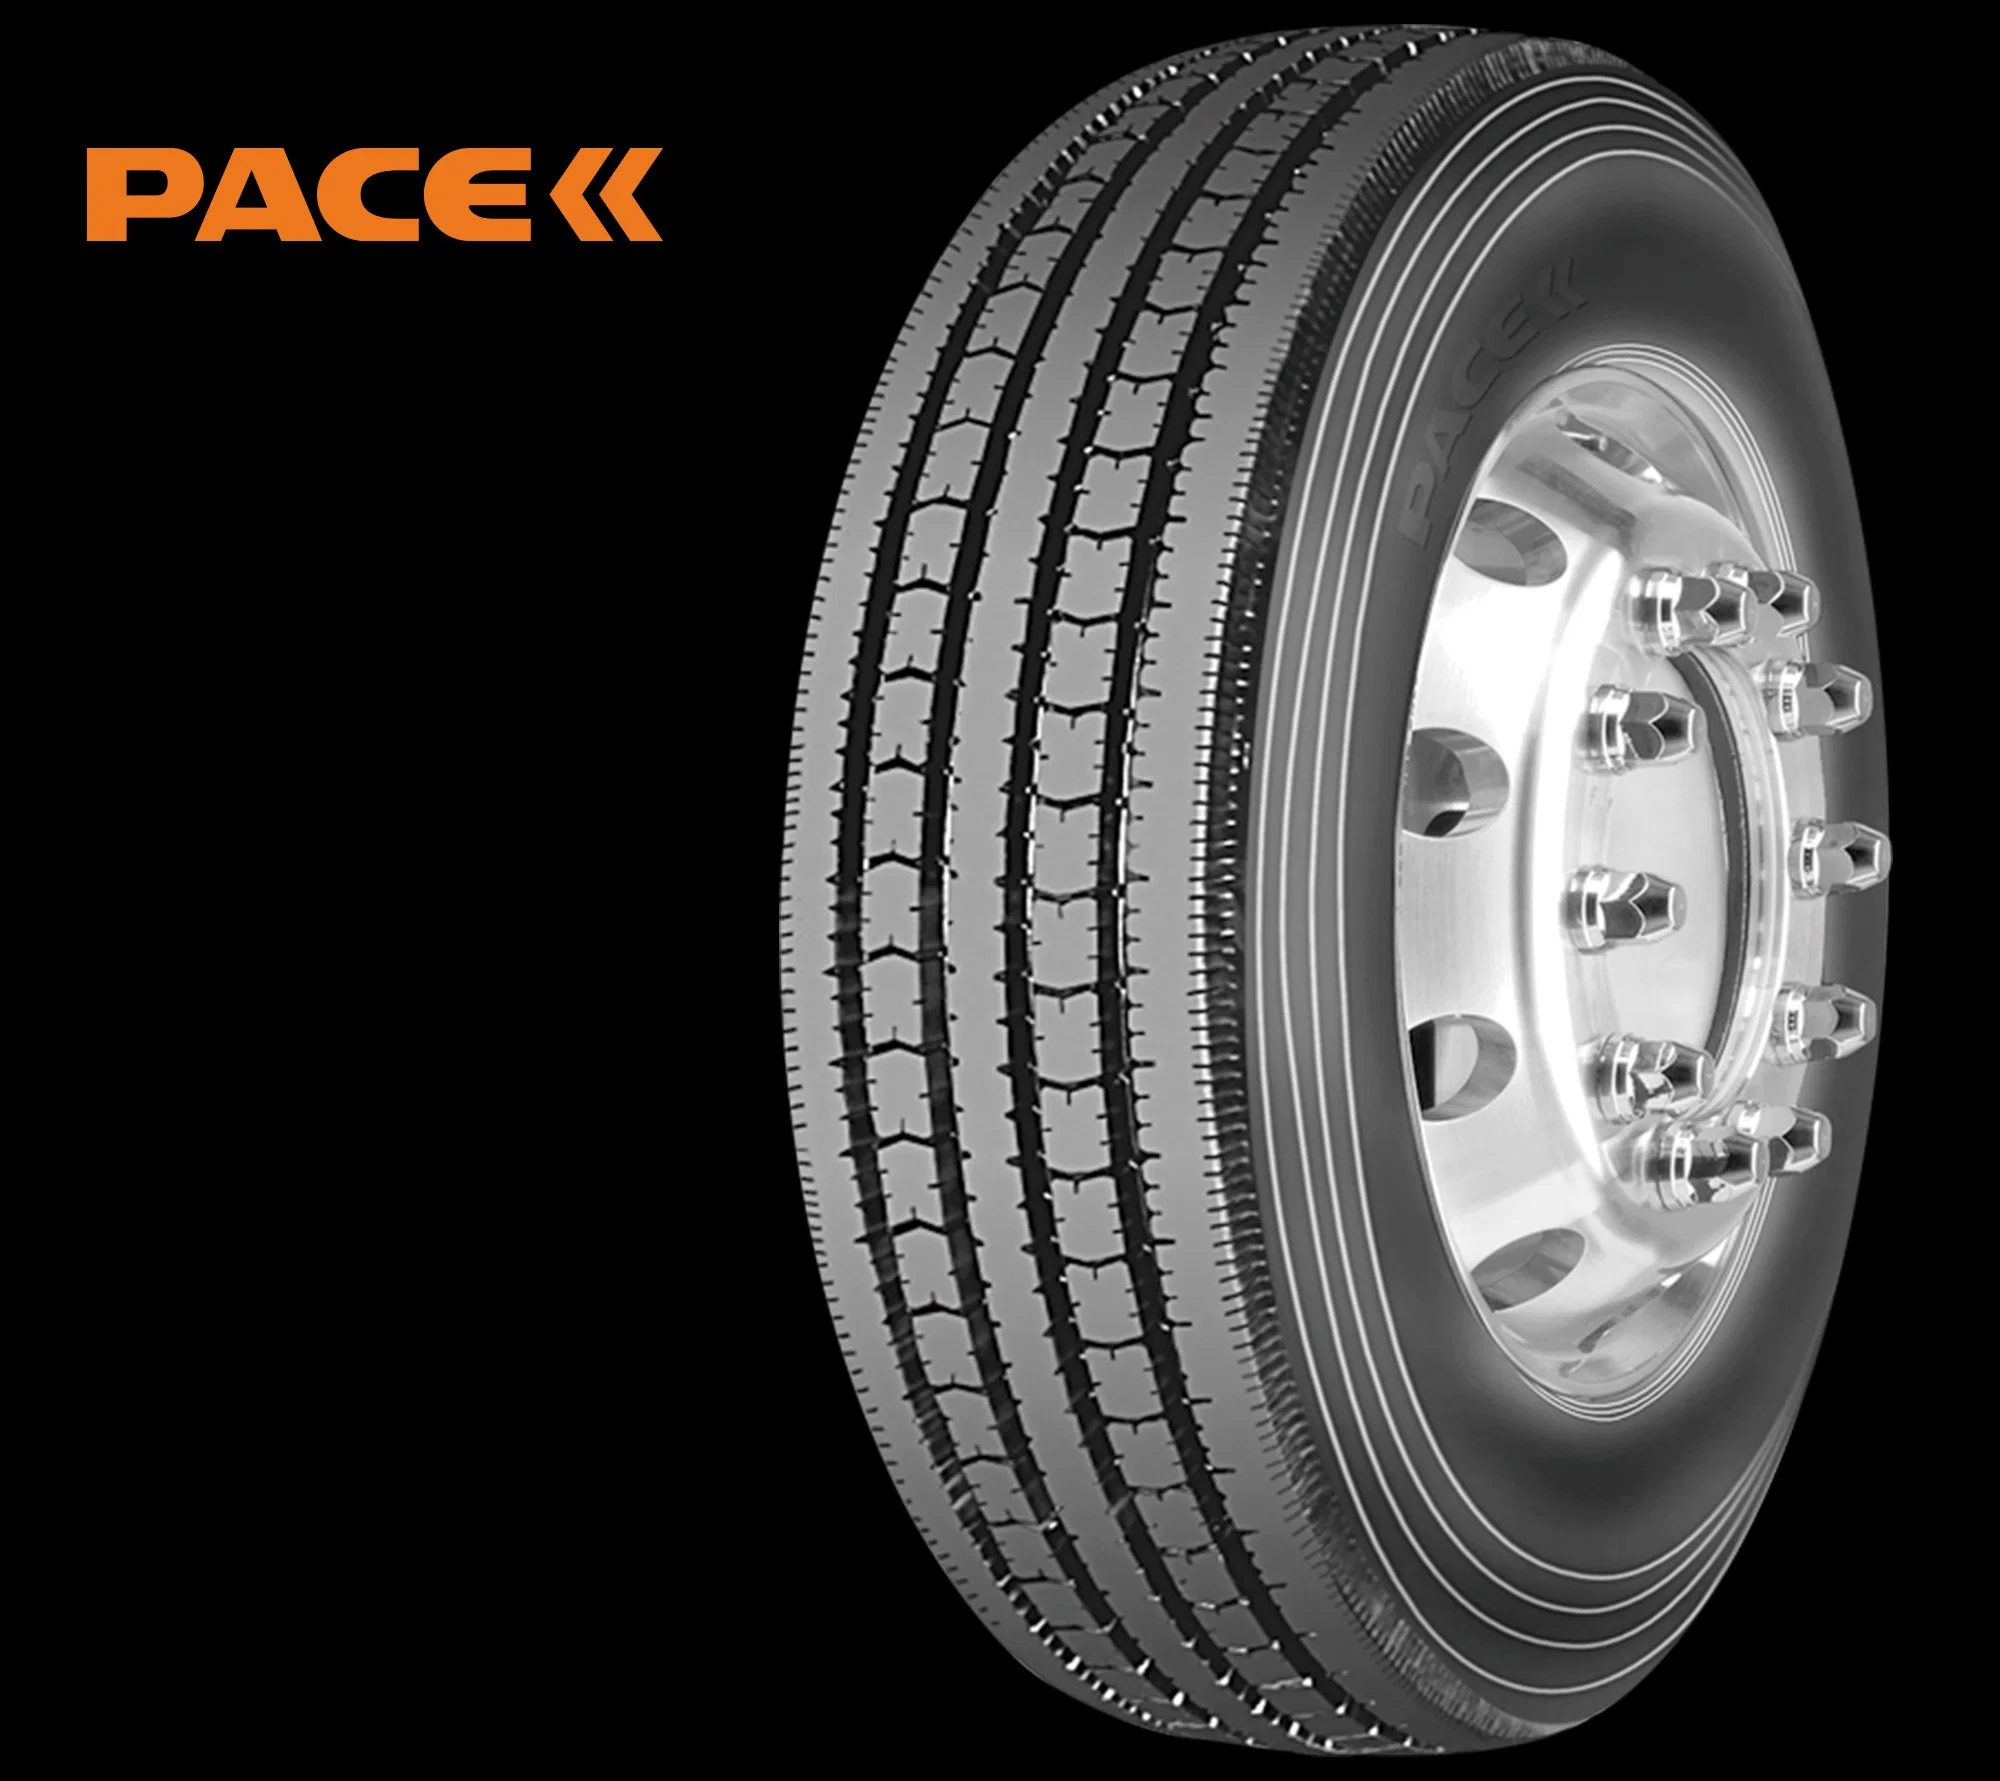 Exclusive TBR Tires, Modern Truck Tires, Superior Quality Radial Truck and Bus Tire